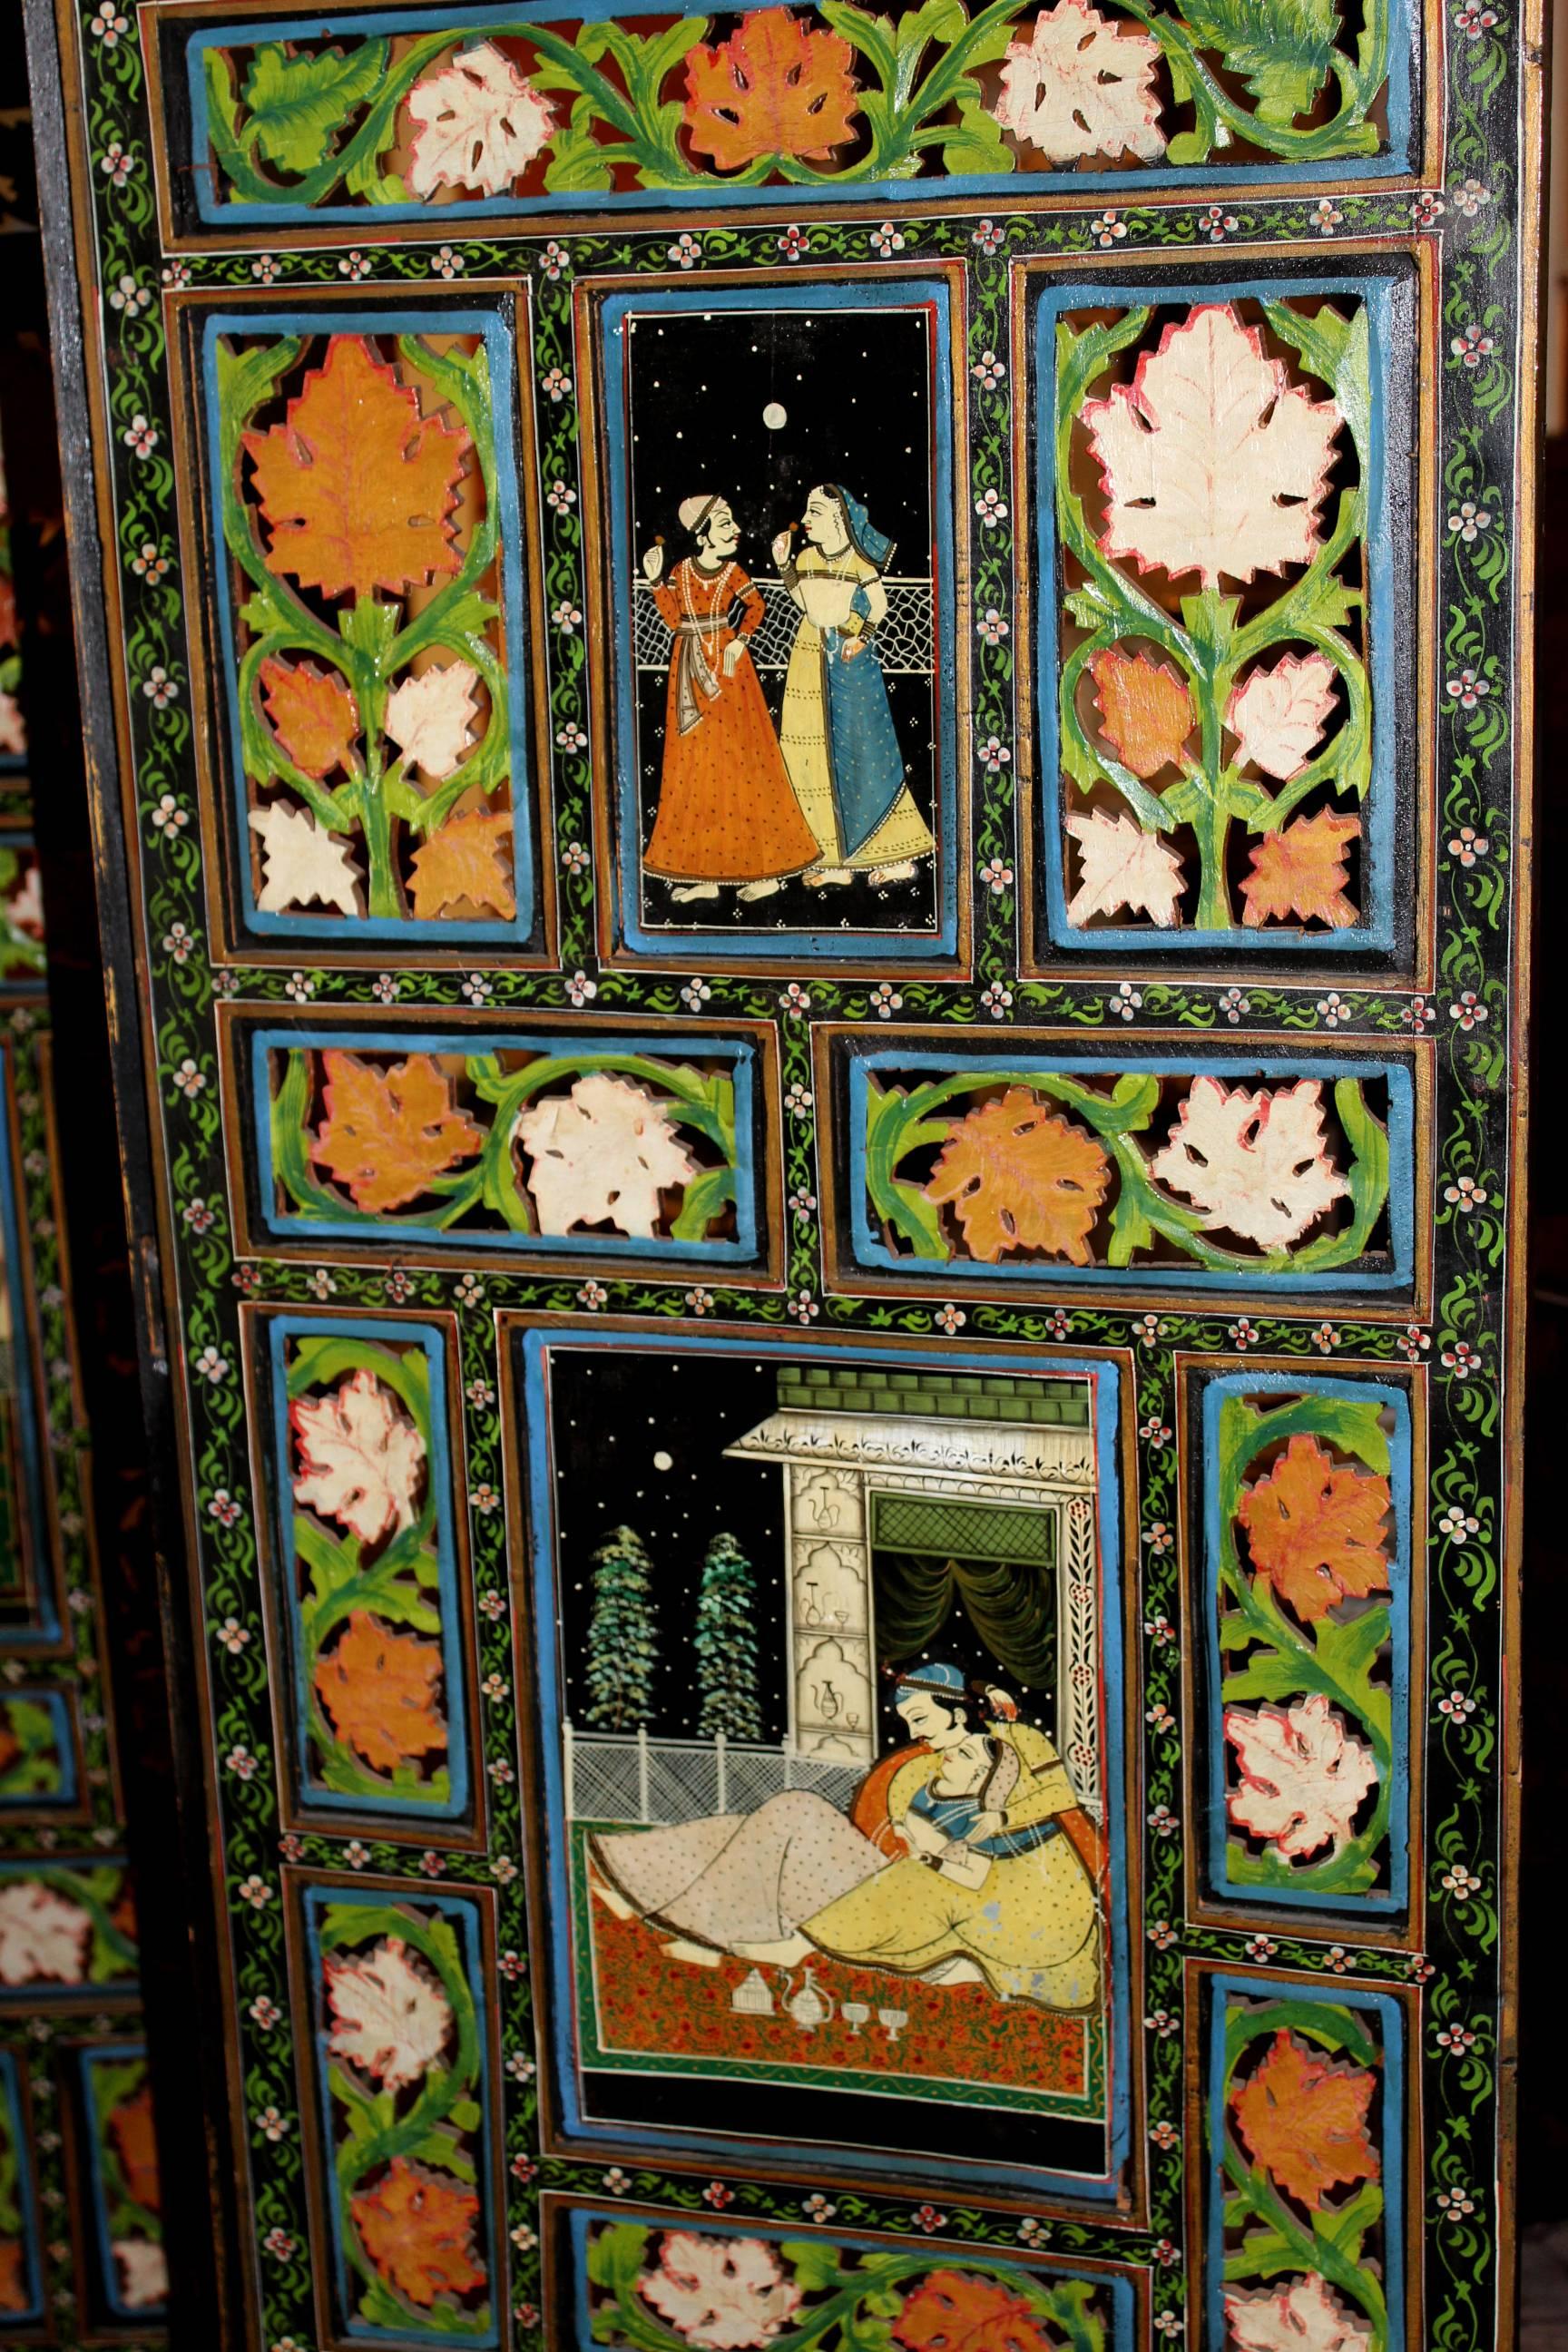 A polychrome hand-painted Indian wooden dressing screen or room divider with four reticulated panels, each panel with a vibrant palette on both sides with painted panel figures, foliate decorated borders and removable shaped crest. Dates to the